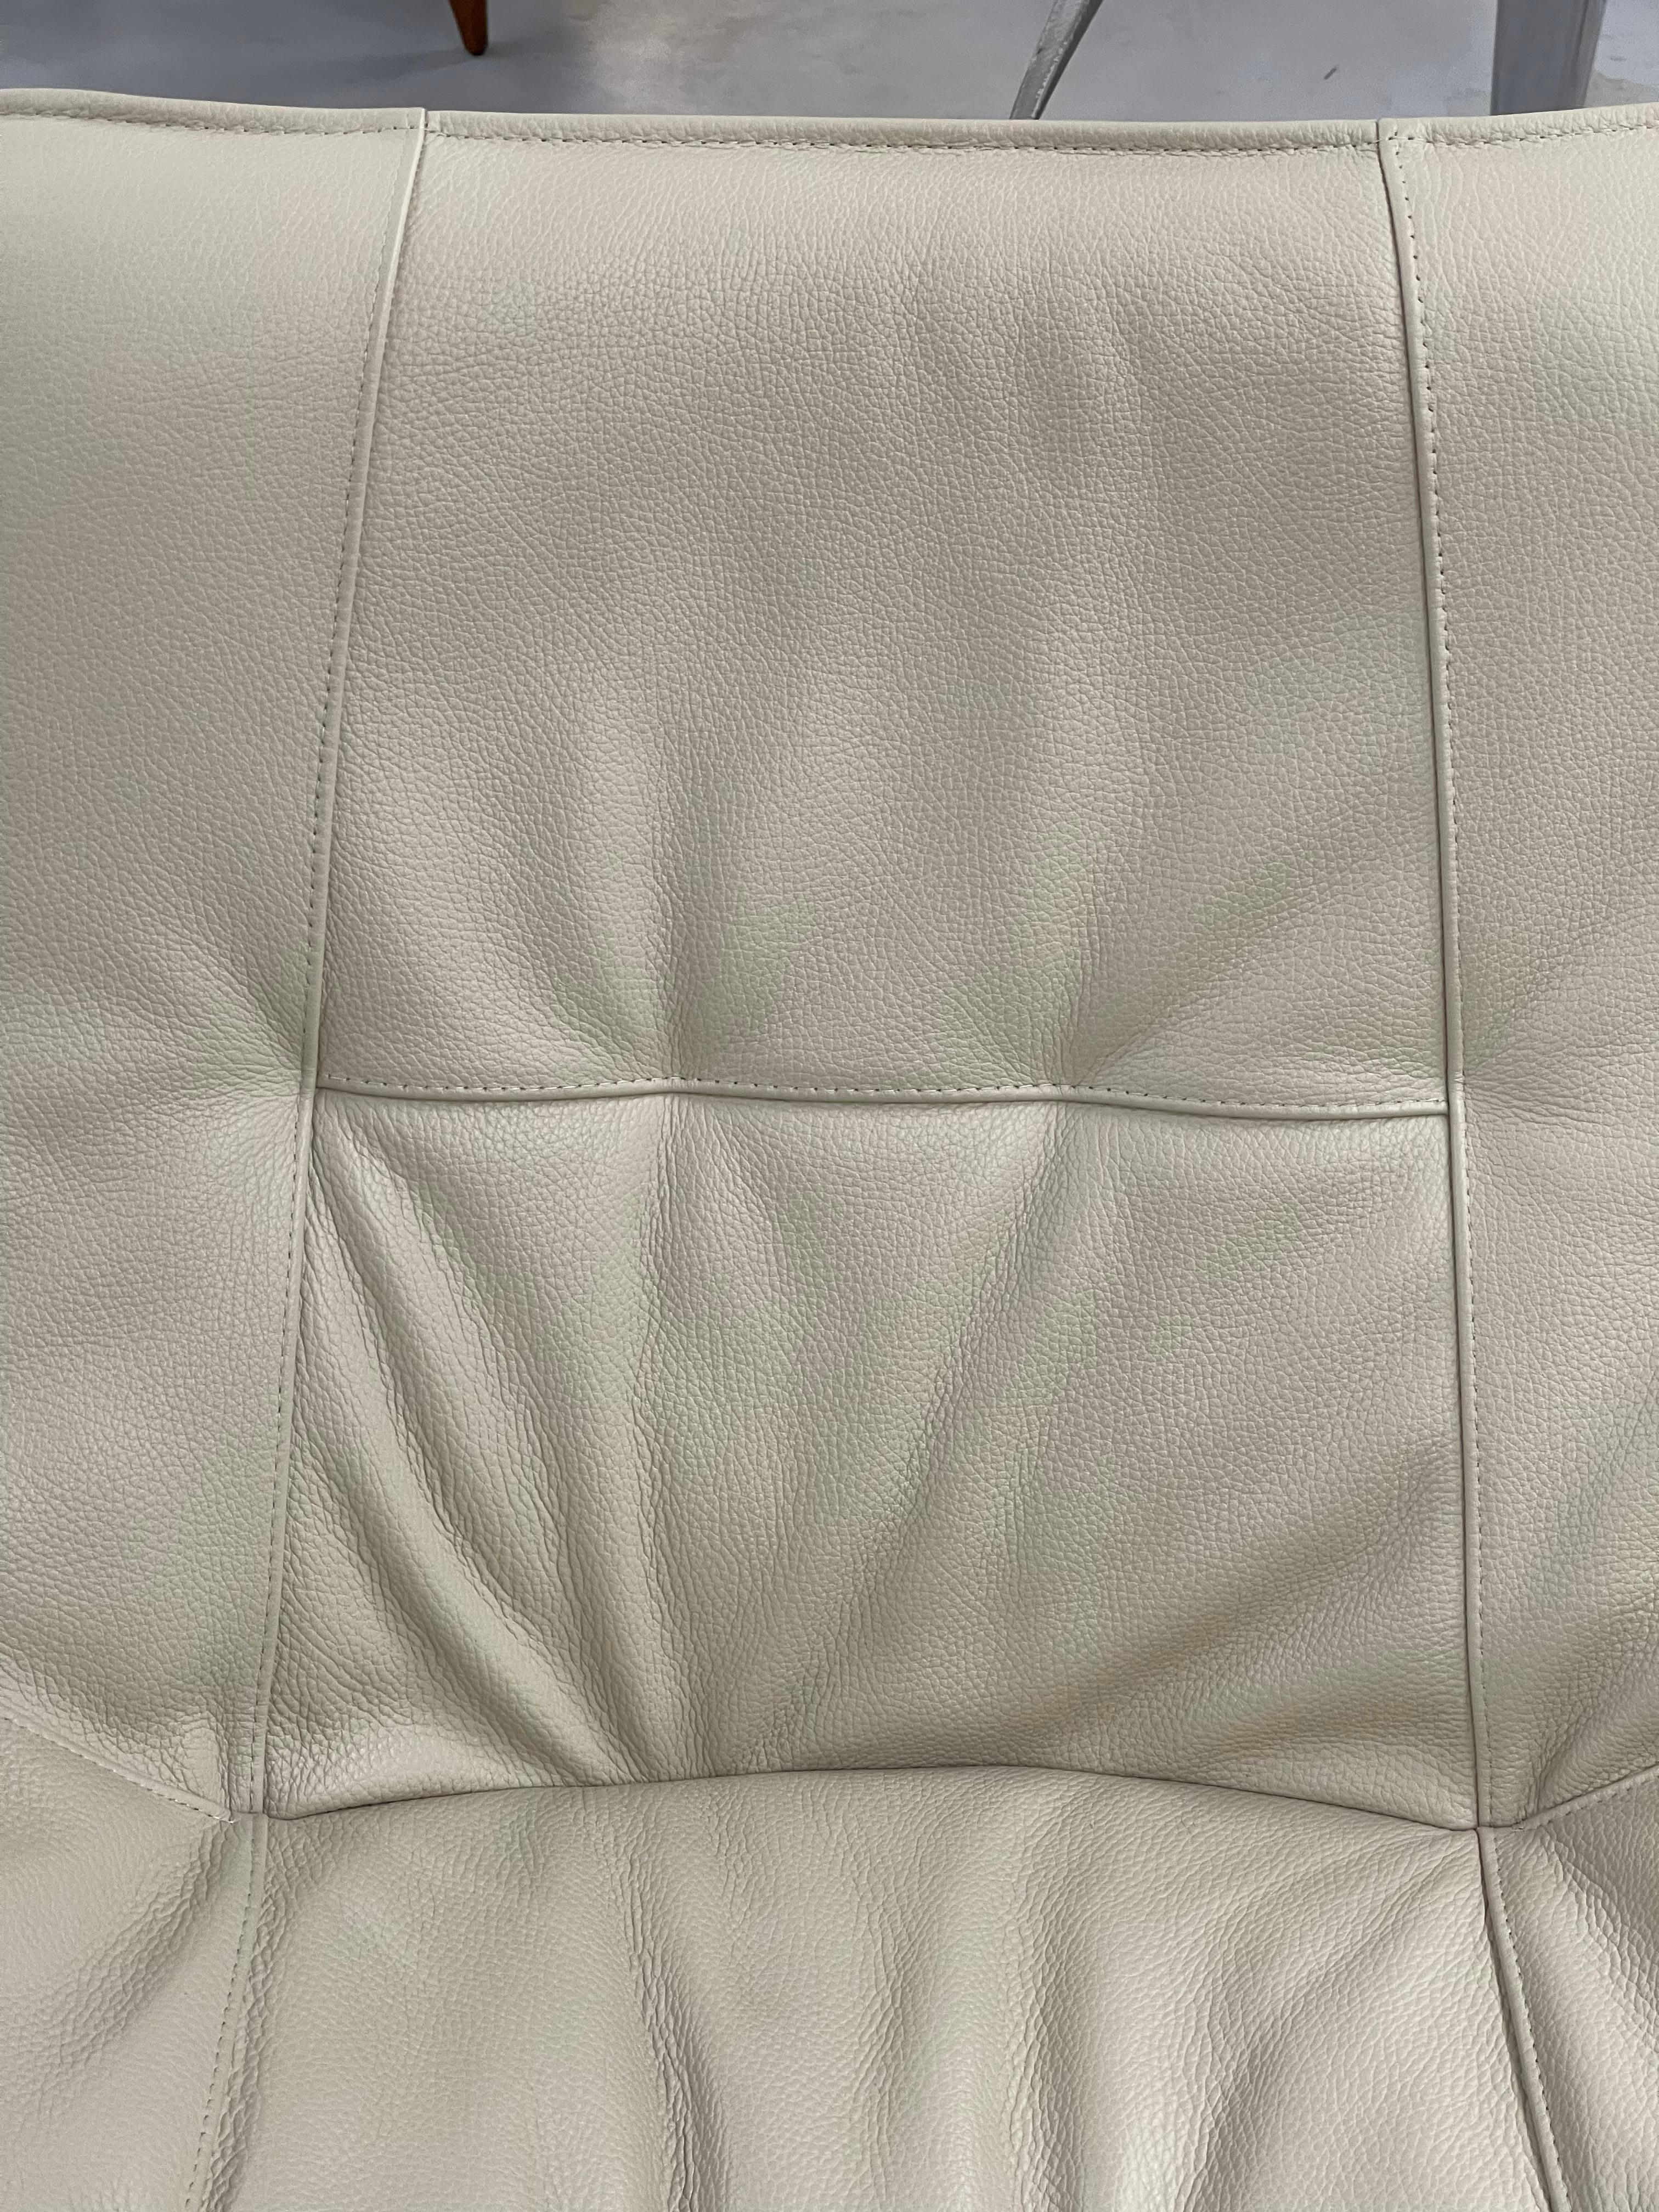 Leather Roche Bobois Flight Chair and Ottoman